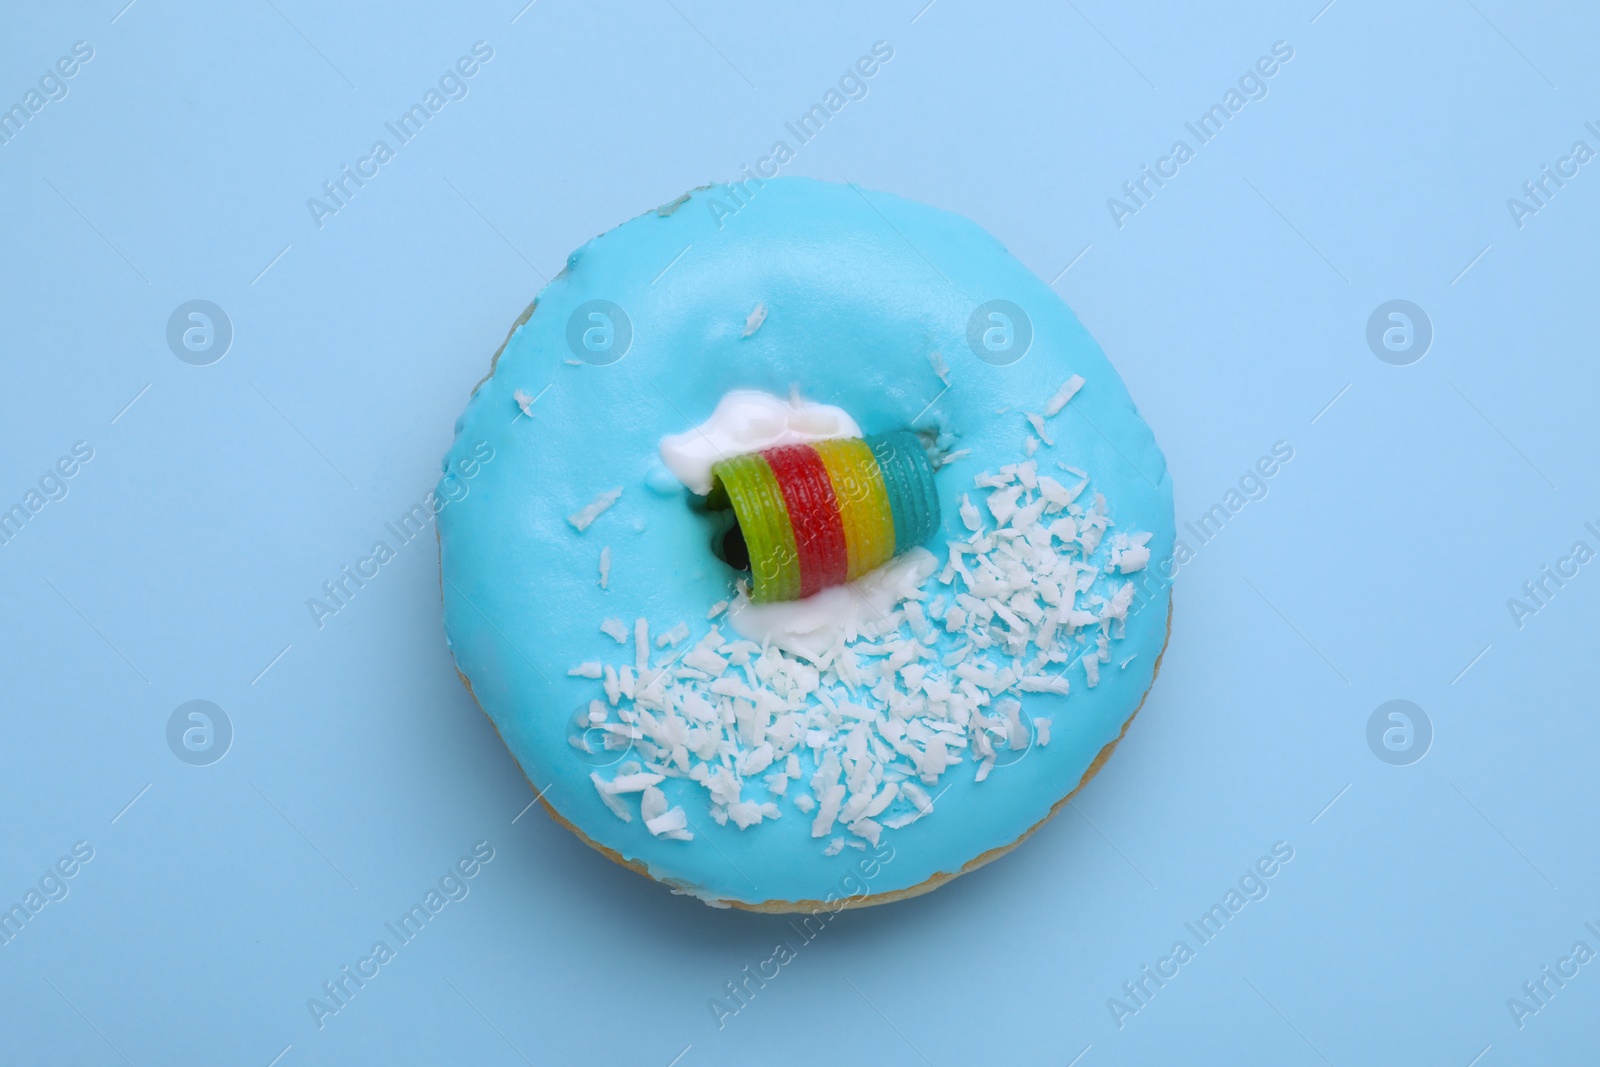 Photo of Tasty glazed donut decorated with coconut shavings and rainbow sour candy on light blue background, top view